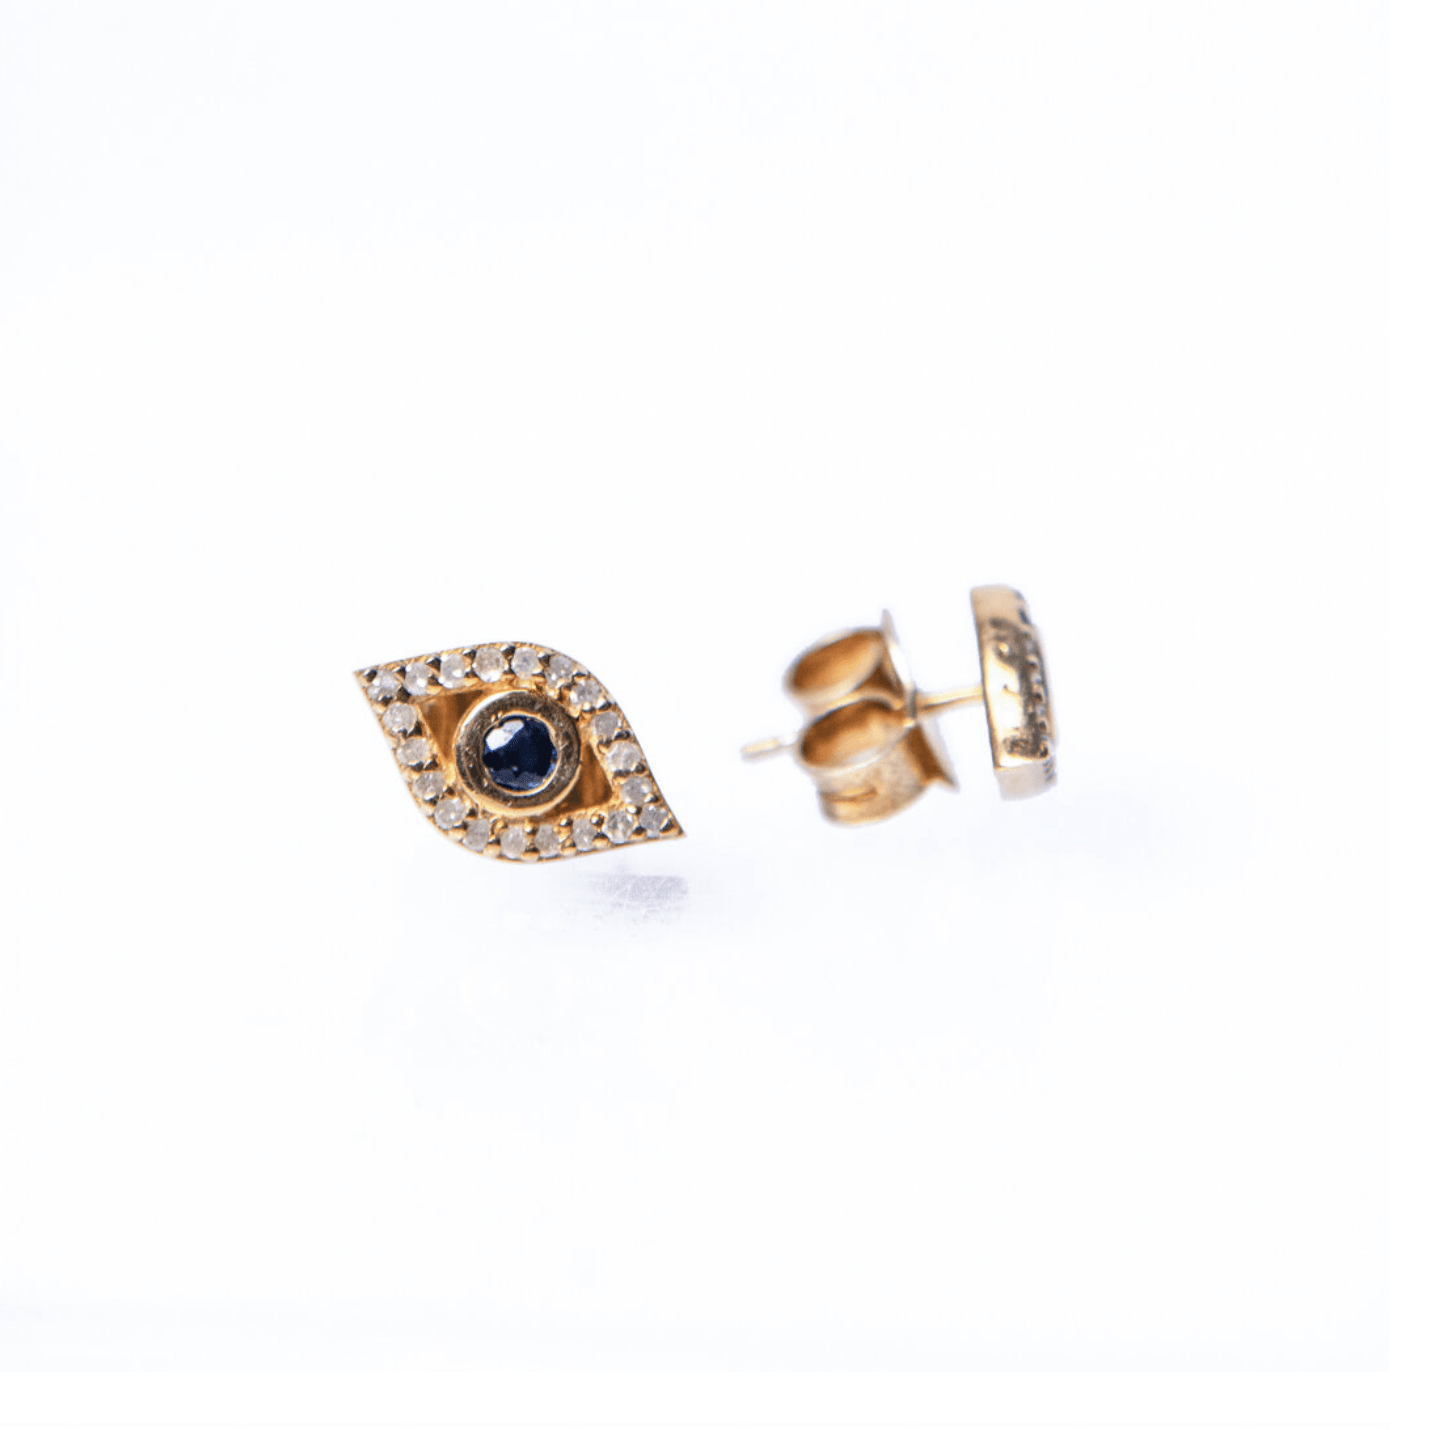 Evil Eye Earrings with Sapphires and Diamonds by Paula Rosen - Haven